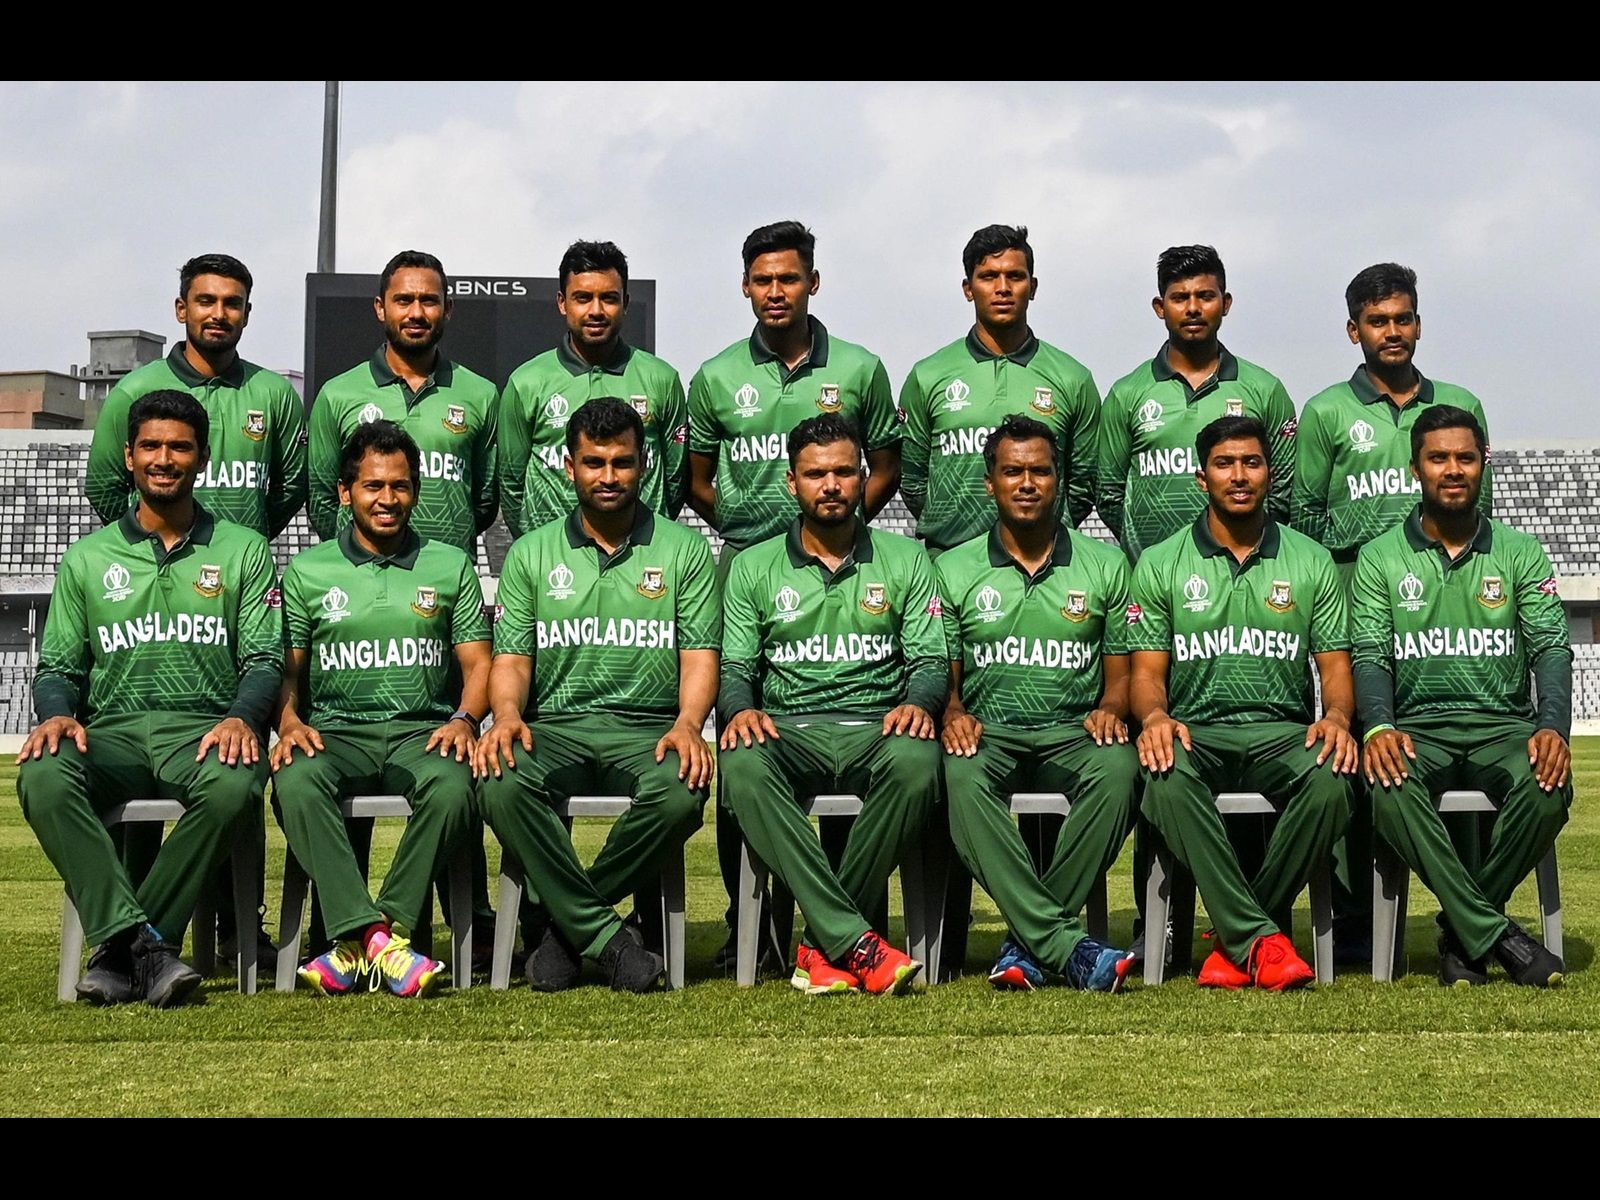 Bangladesh change Cup kit after outcry